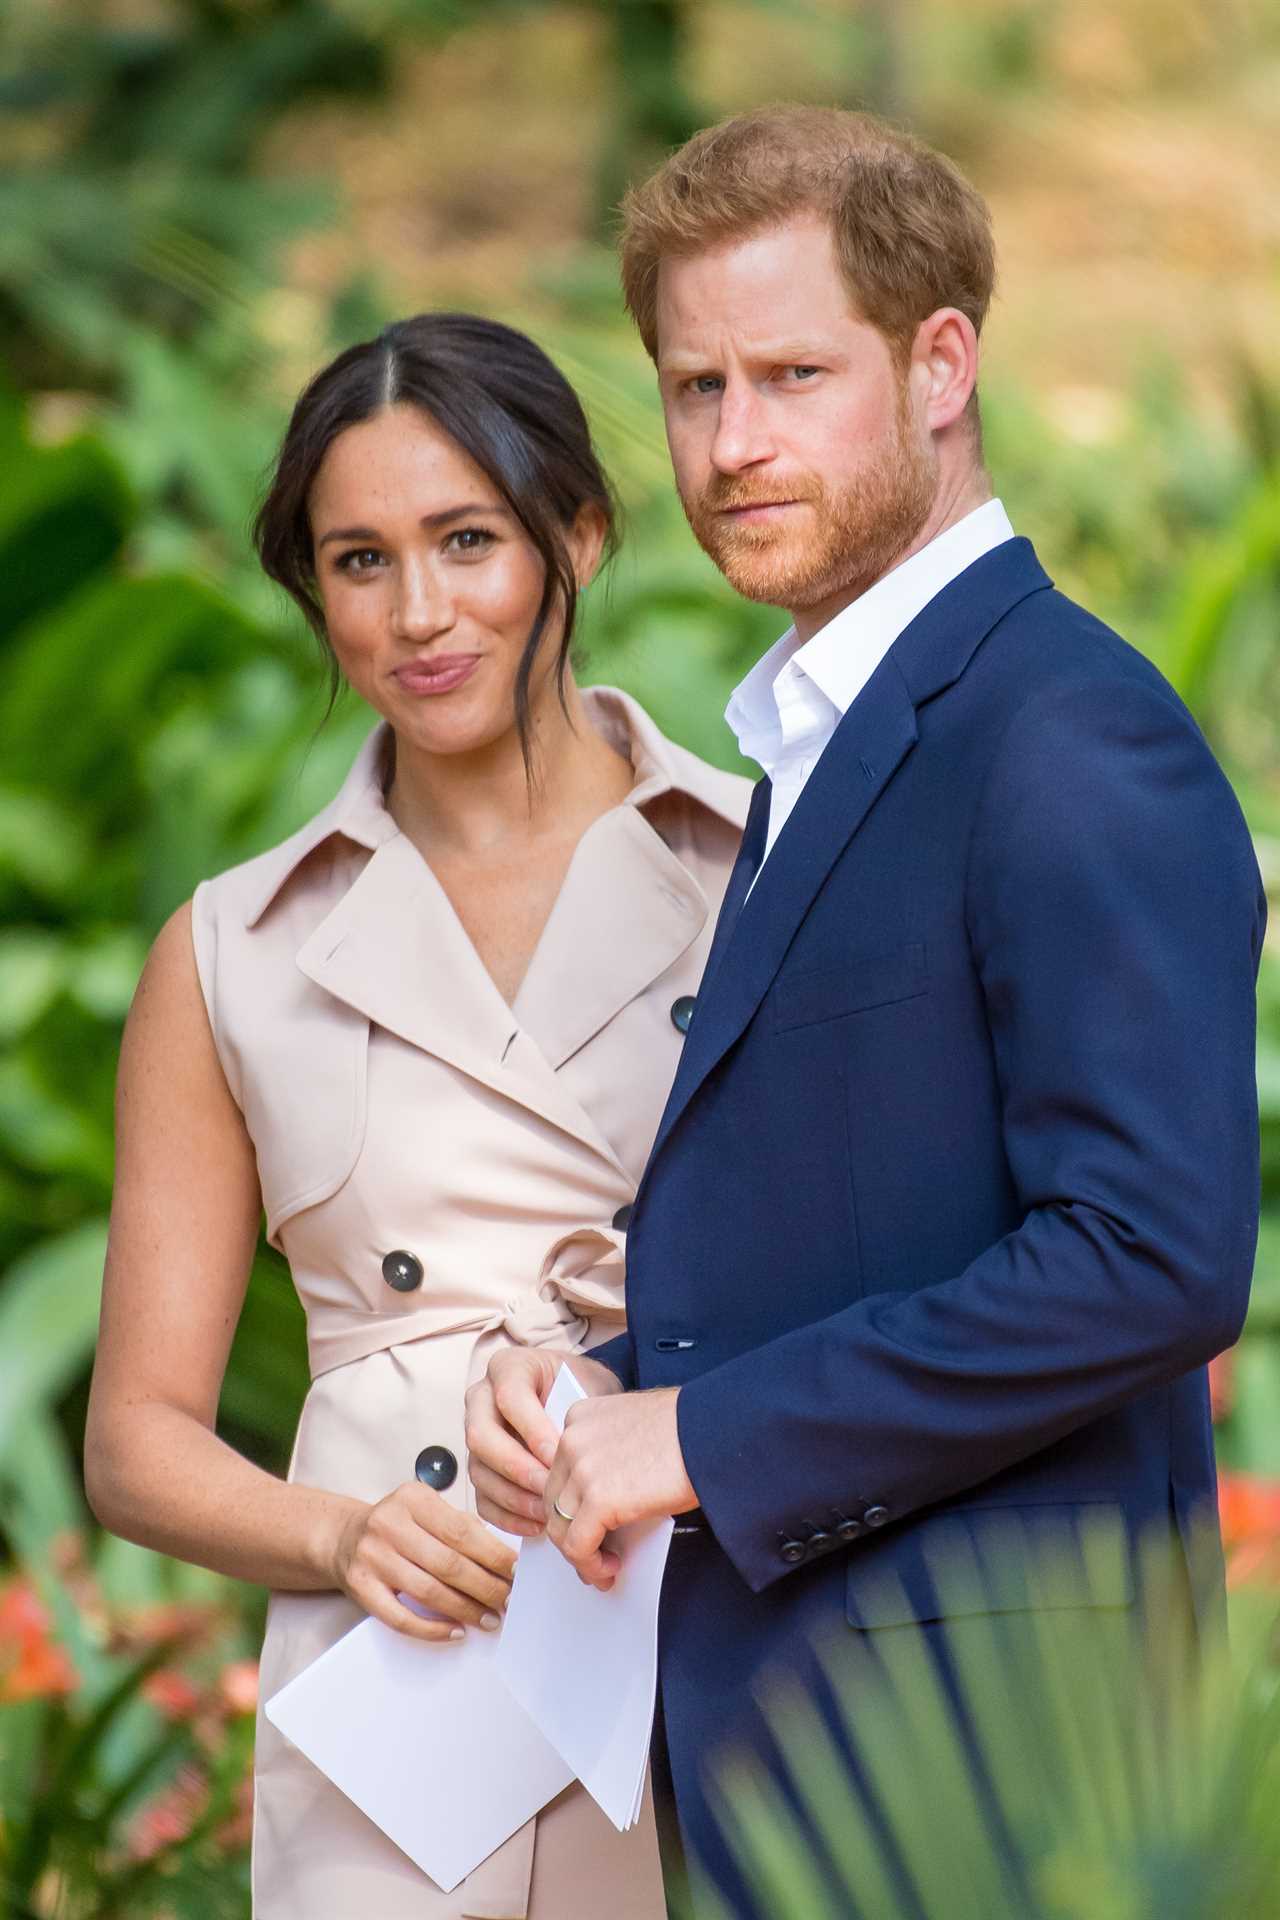 Meghan Markle & Prince Harry’s £88million Netflix TV documentary to ‘air within weeks’ despite them ‘wanting it delayed’